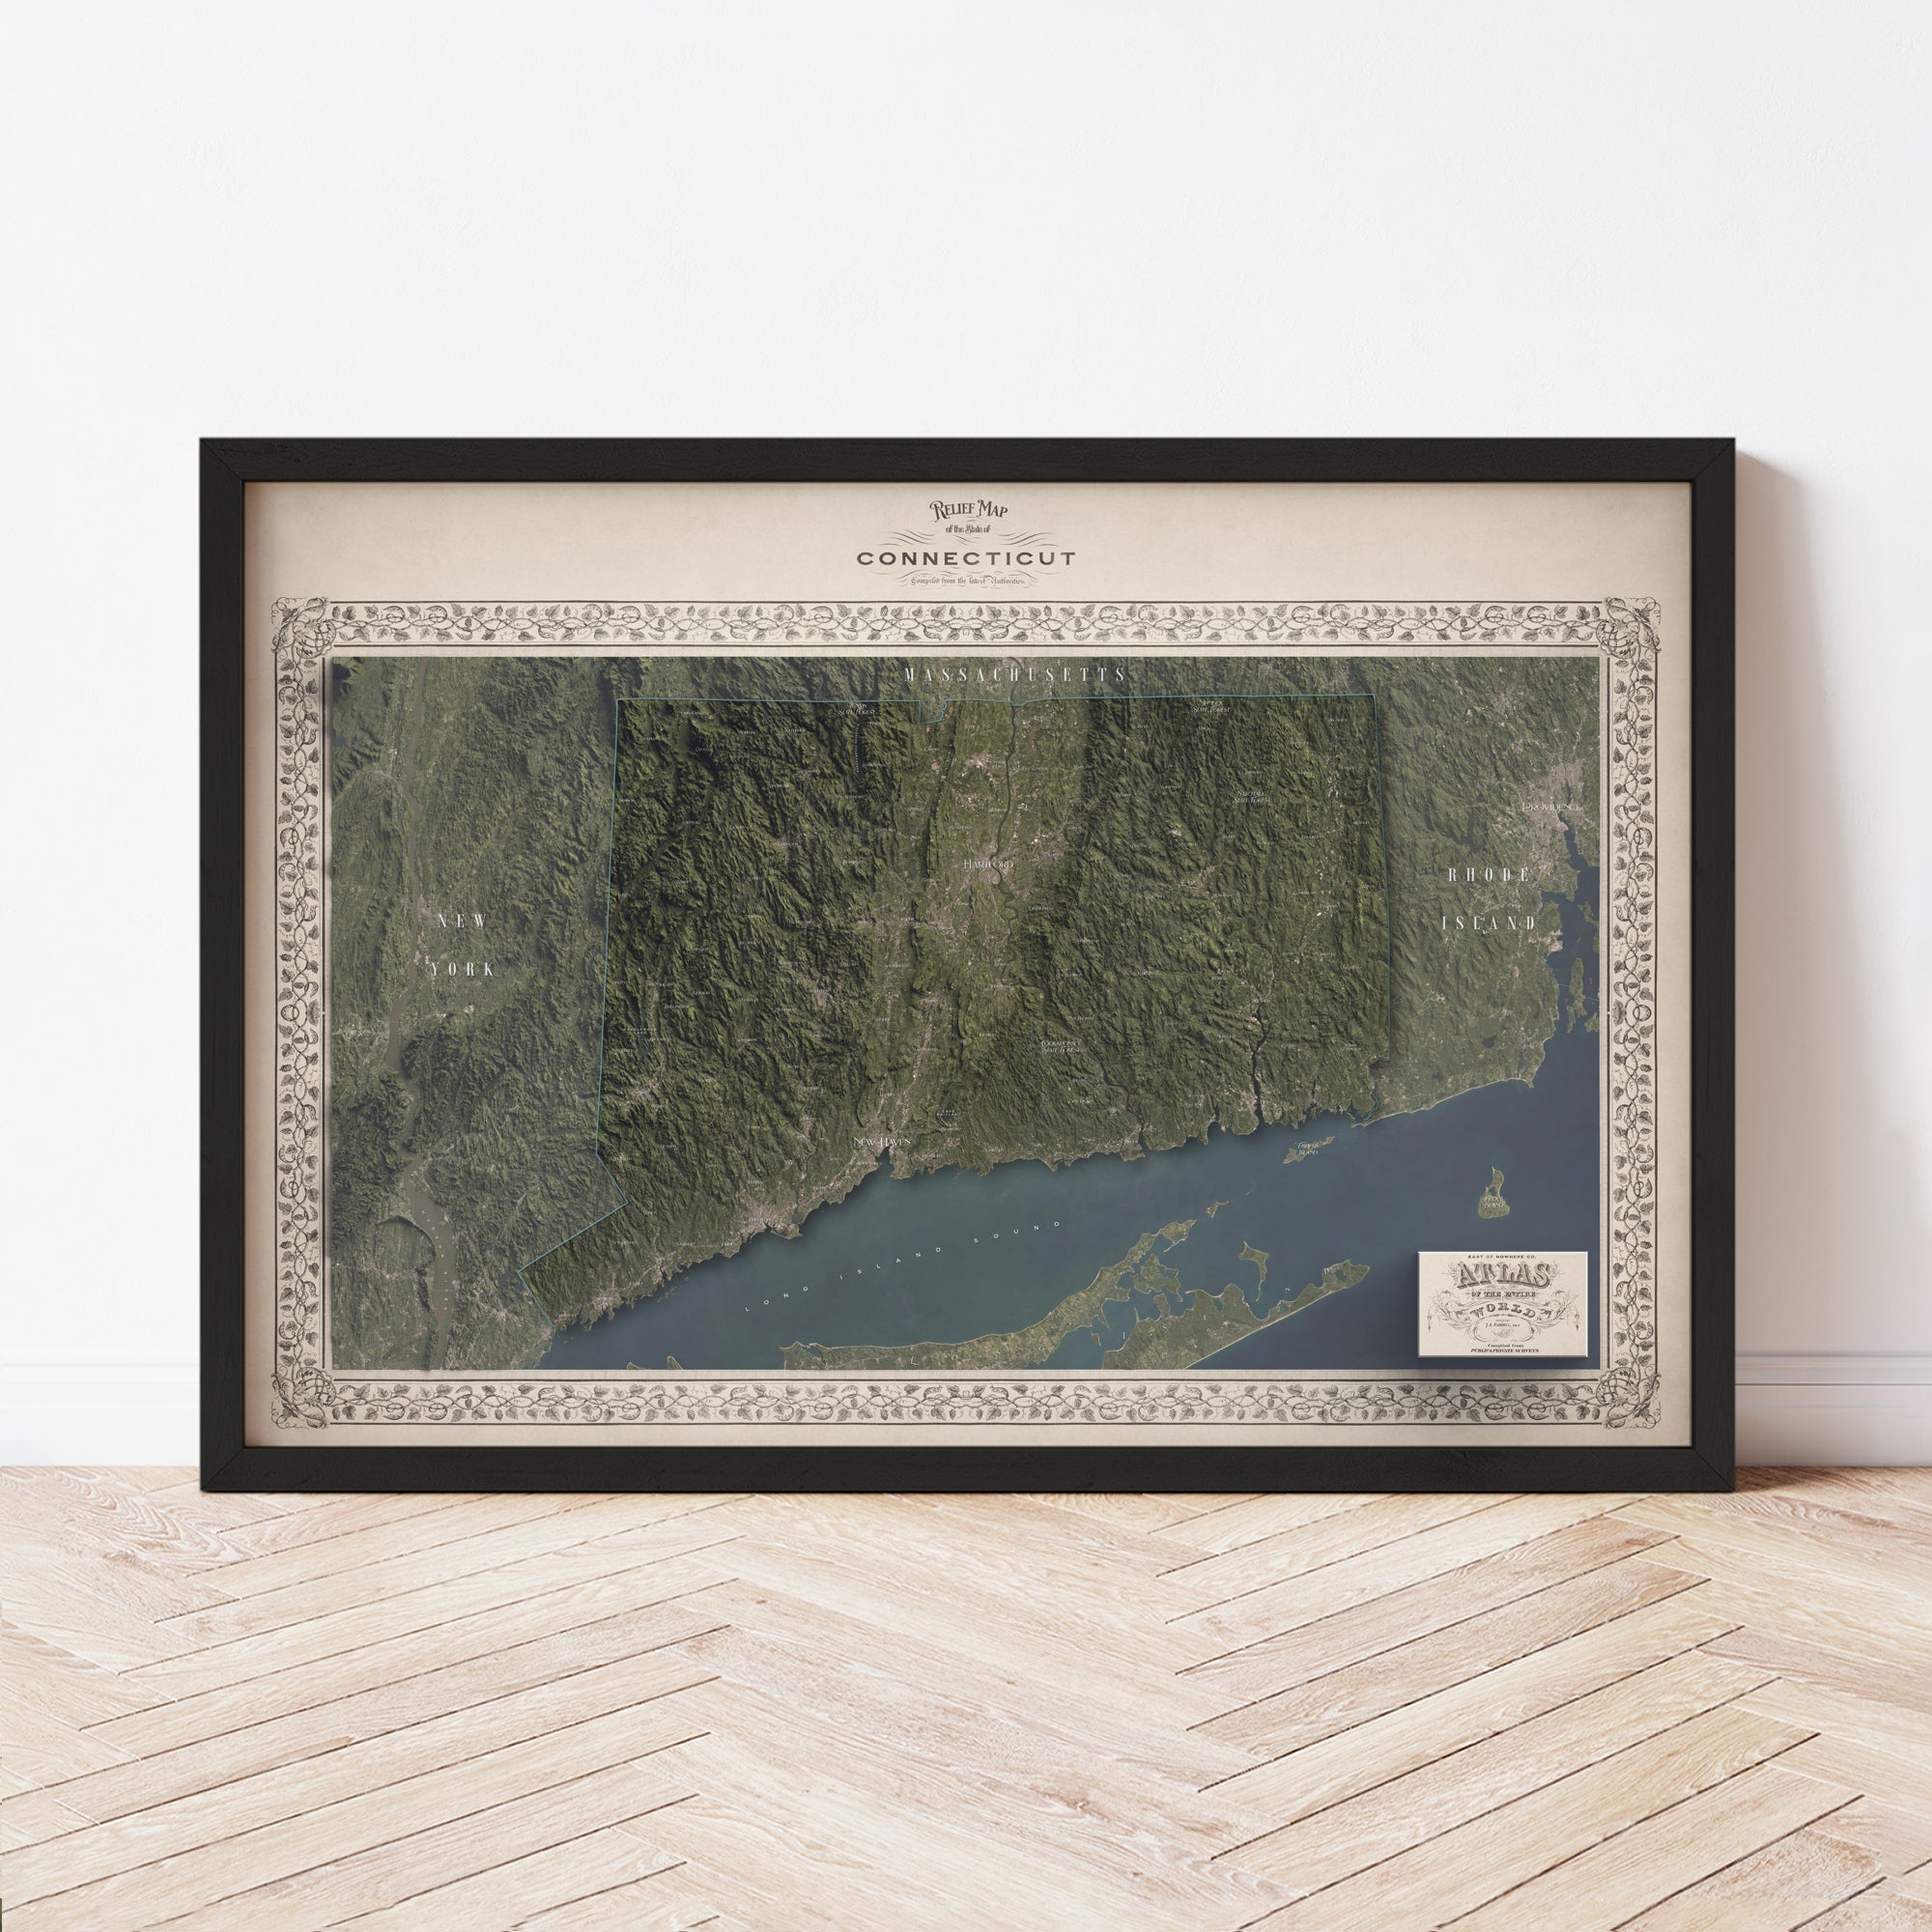 Connecticut Map - The East of Nowhere World Atlas